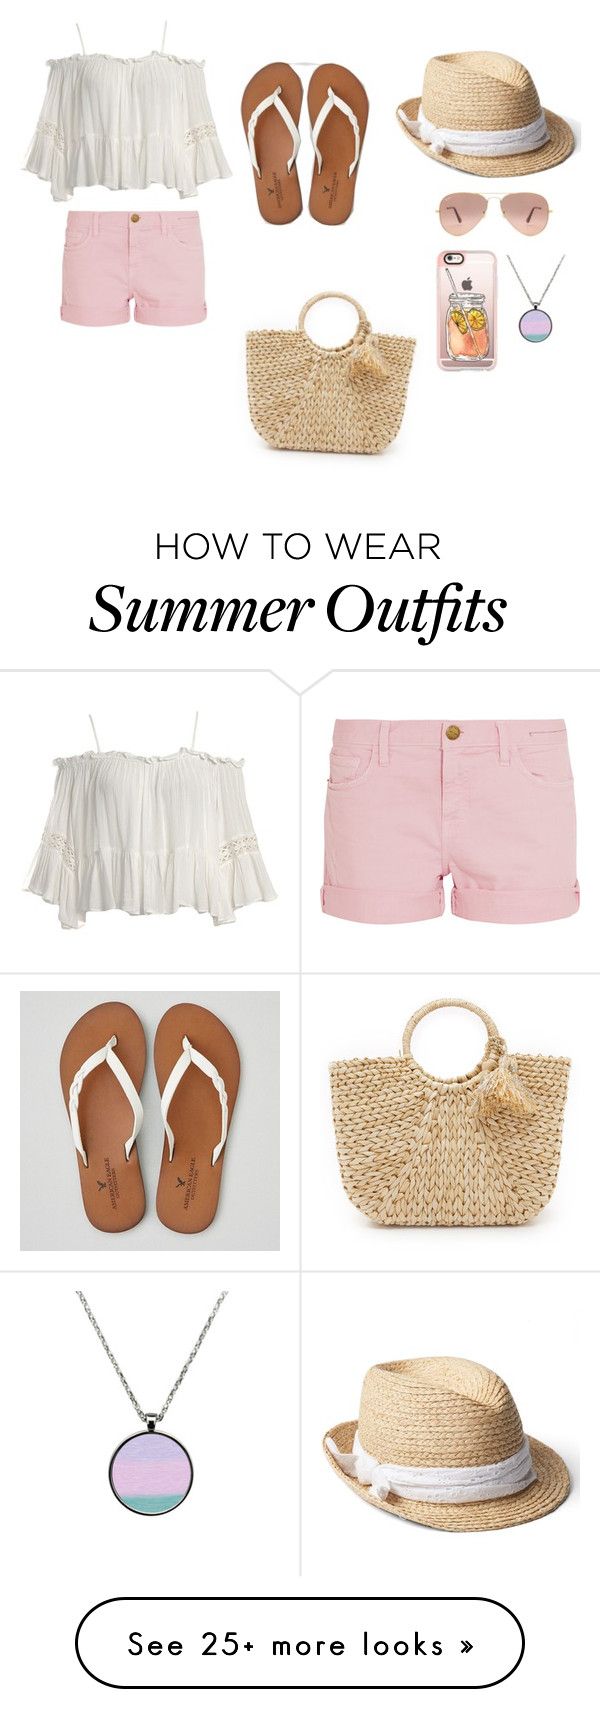 "My First Polyvore Outfit" by diana-matamoros on Polyvore featuring Sa...